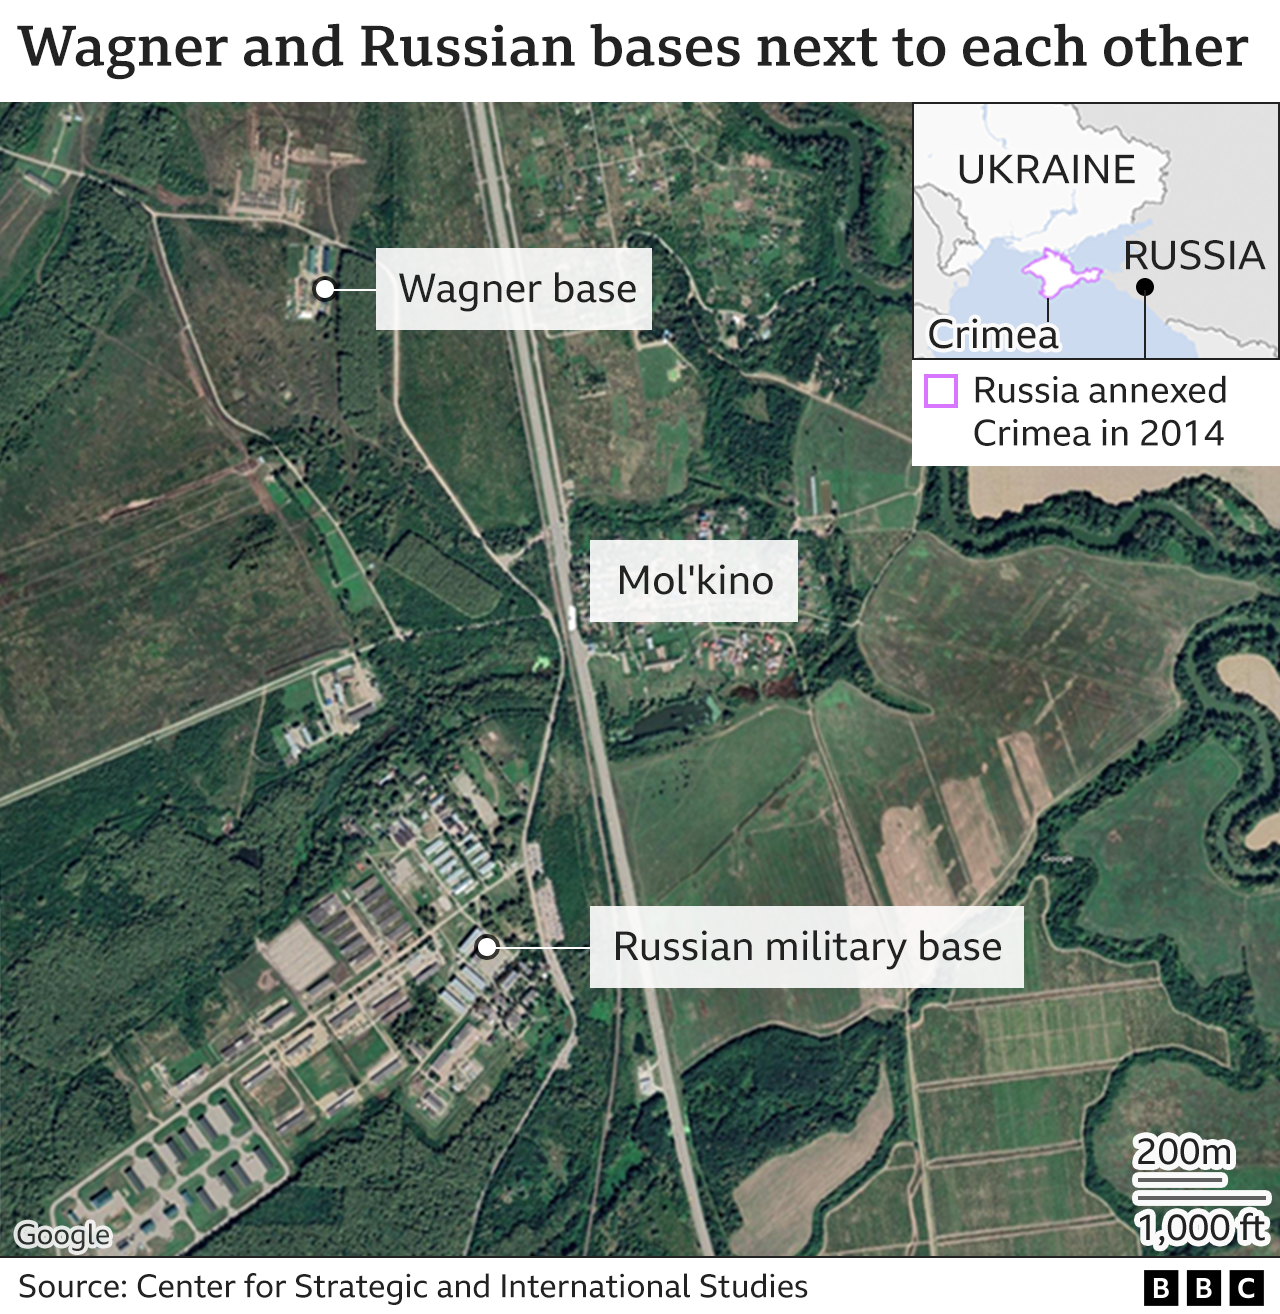 Satellite image showing the locations of a Wagner training base and a Russian military base at Mol'kino, near the Black Sea.